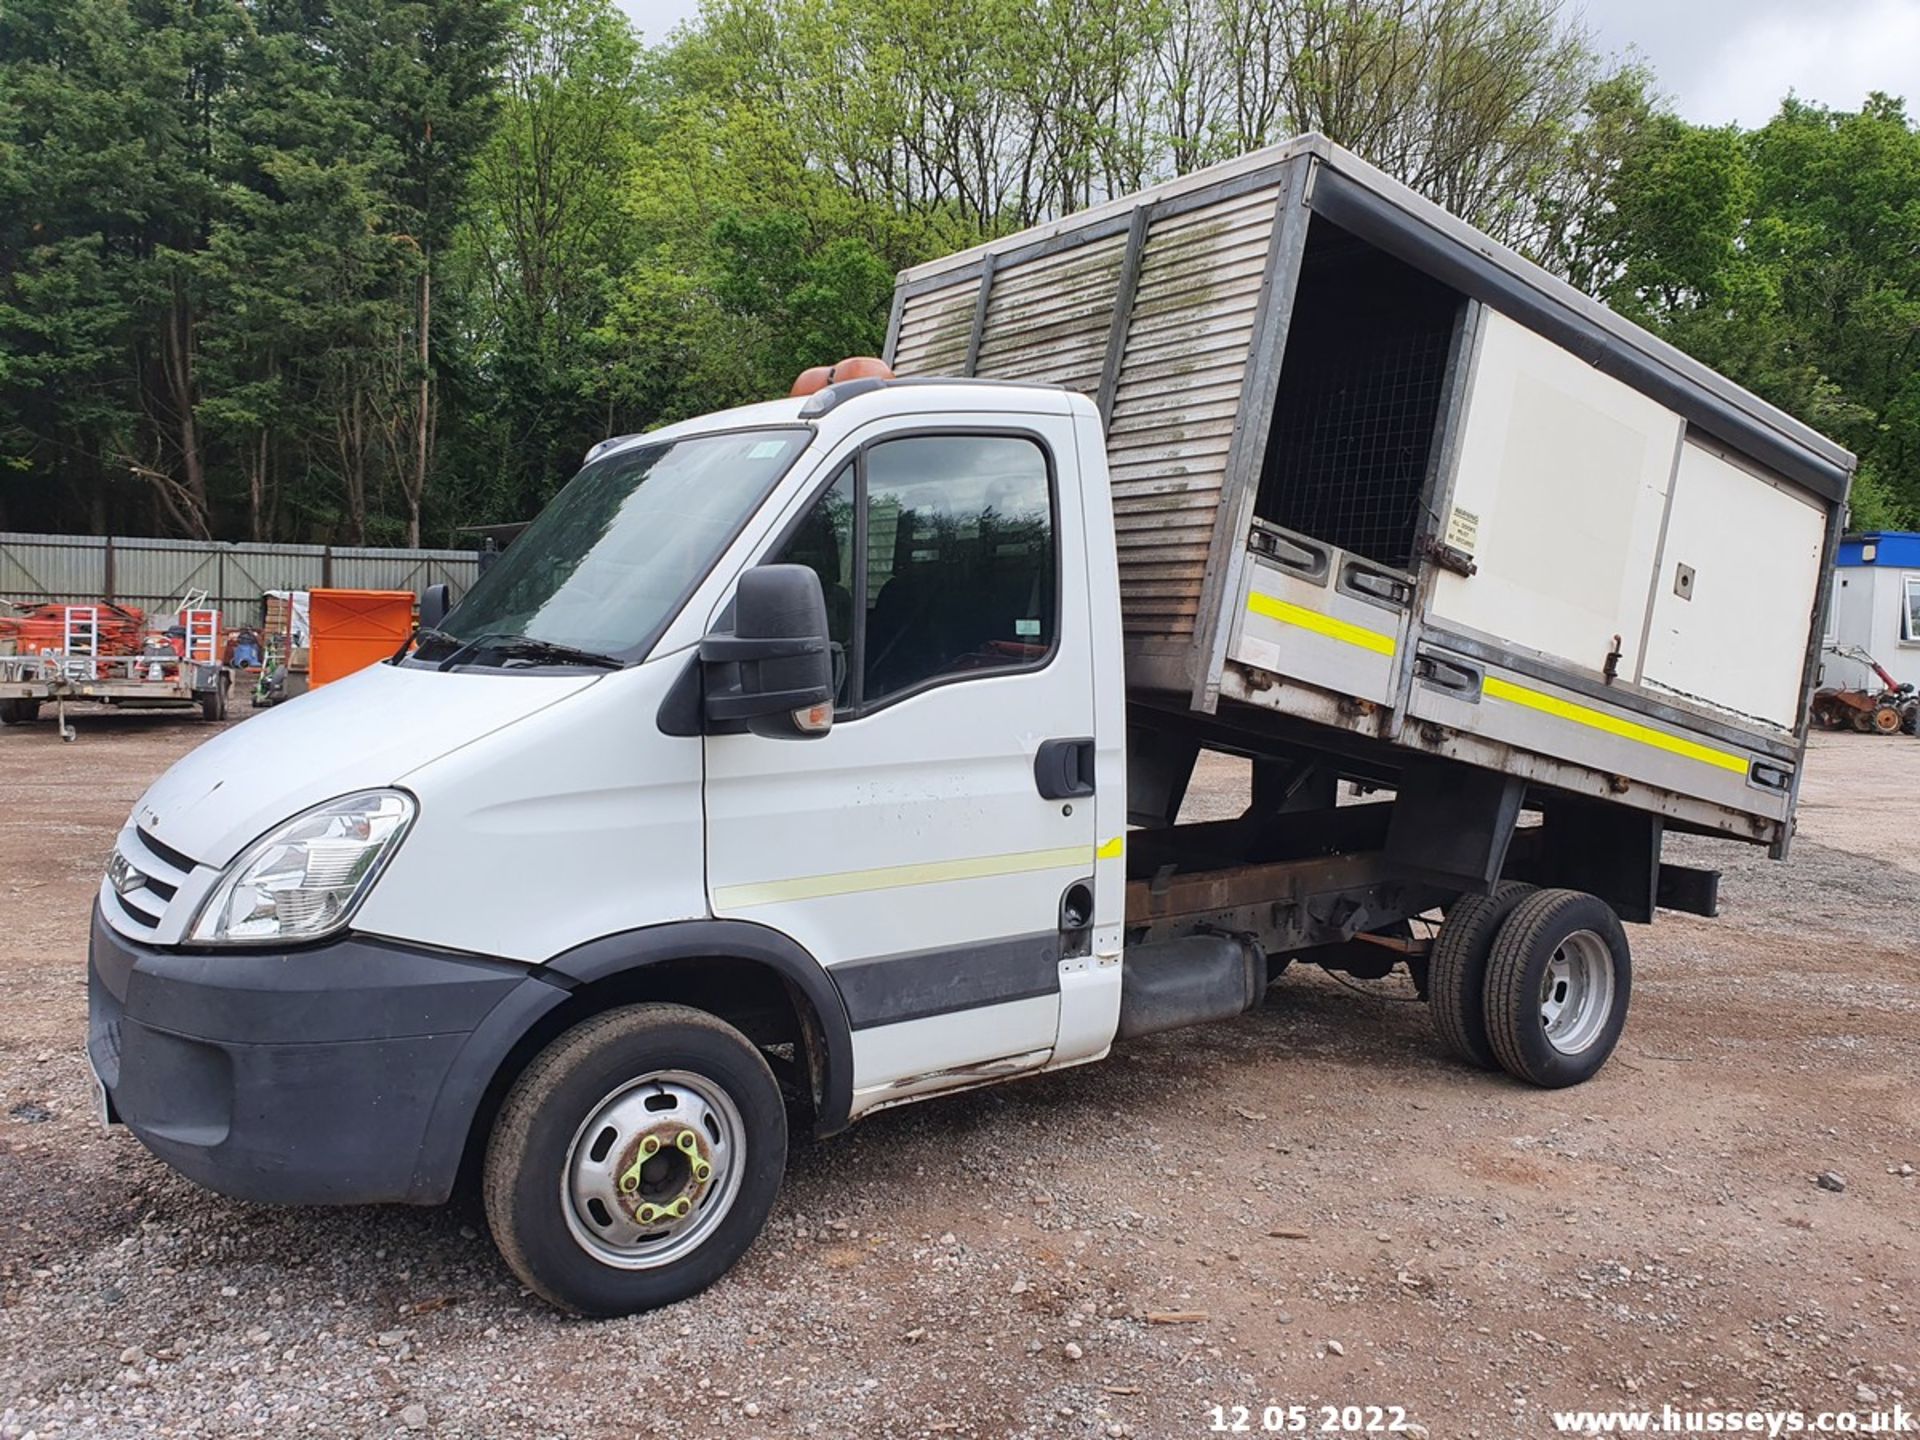 07/57 IVECO DAILY 35C15 MWB - 2998cc 2dr Tipper (White, 212k) - Image 13 of 21